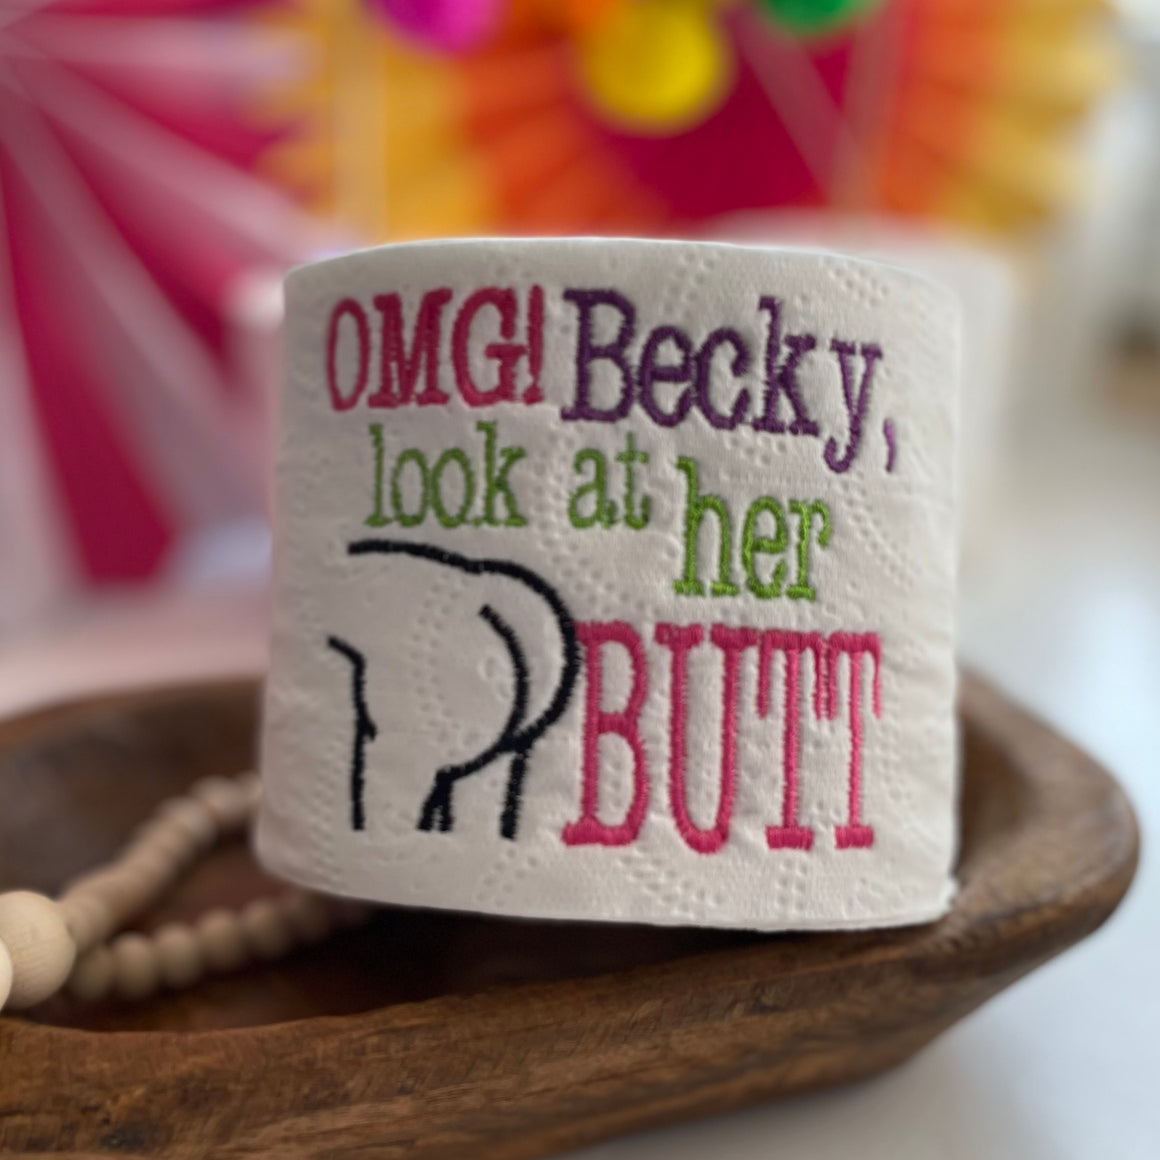 "OMG Becky Look at her Butt" Funny Gift Toilet Paper